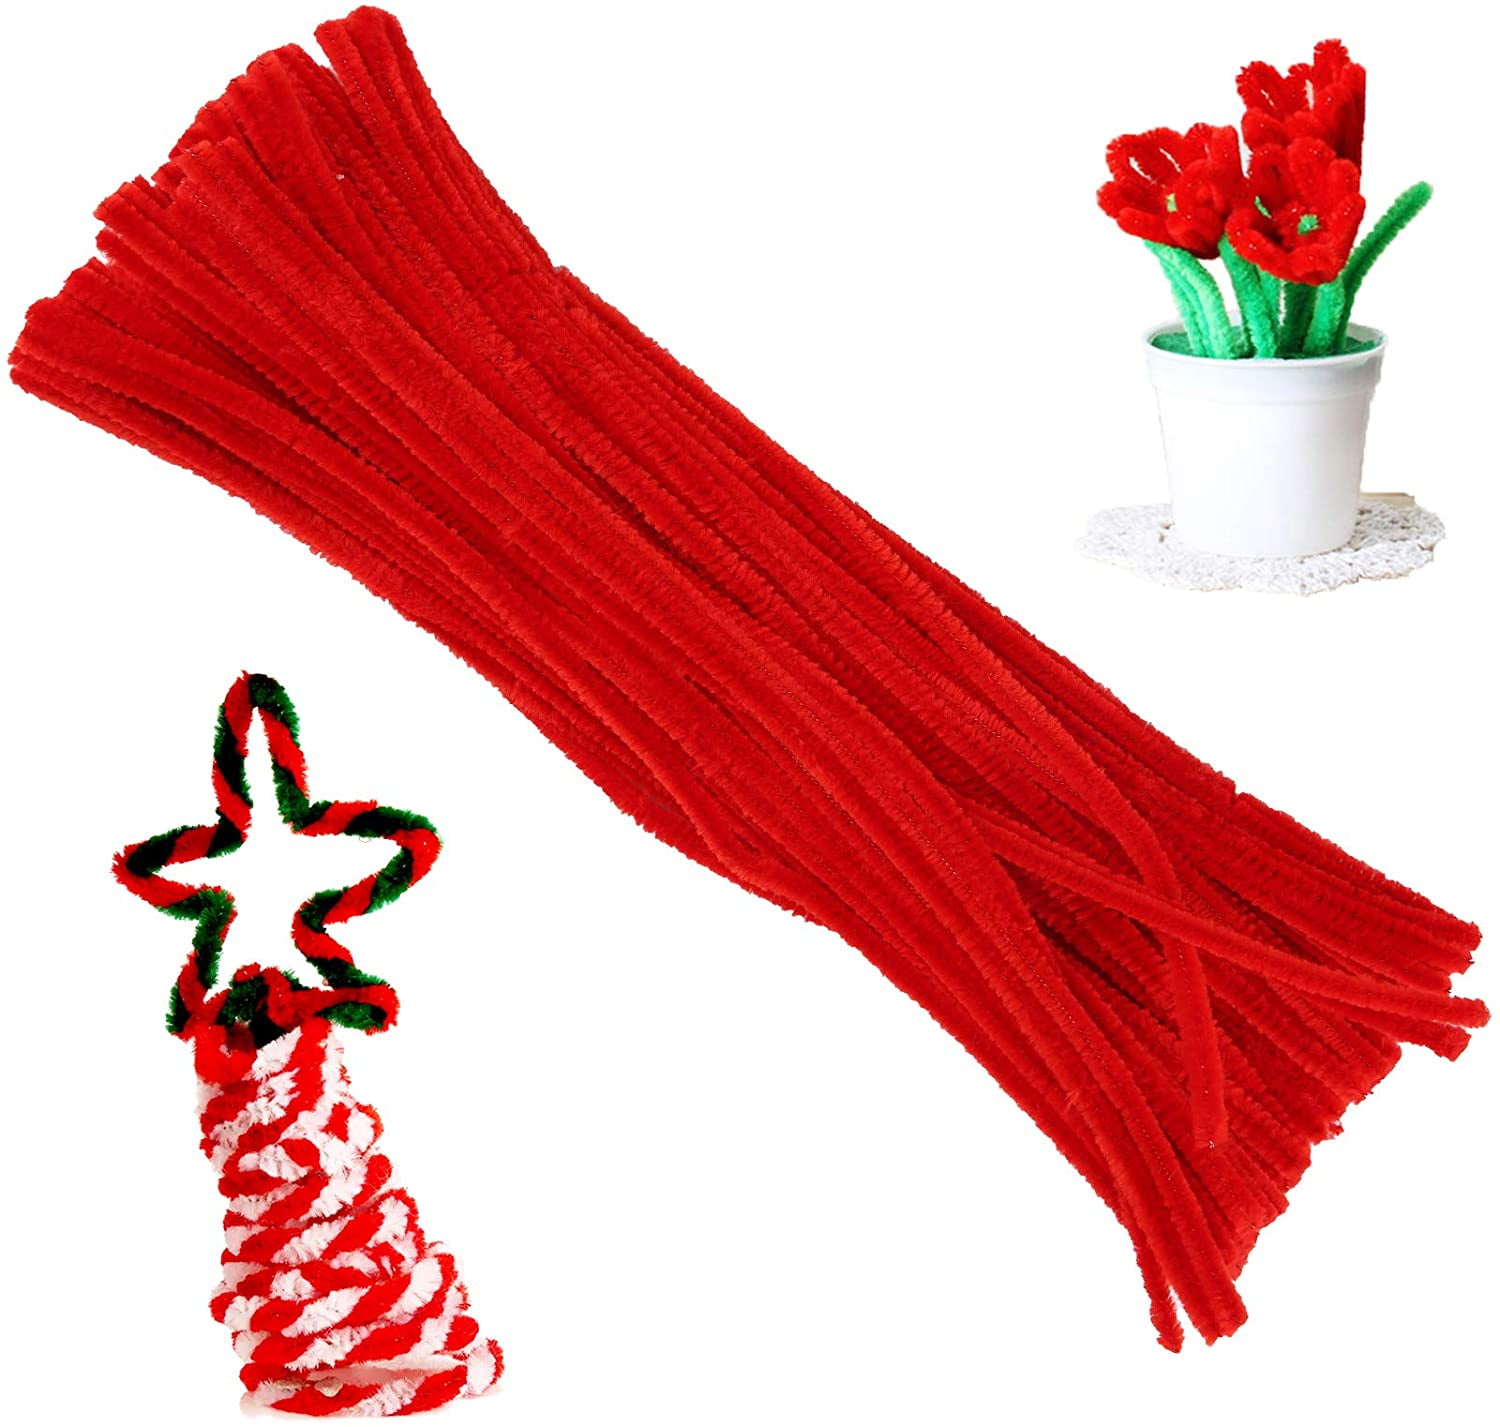 100 Pieces Pipe Cleaners Chenille Stem, Solid Color Pipe Cleaners Set for  Pipe Cleaners DIY Arts Crafts Decorations, Chenille Stems Pipe Cleaners